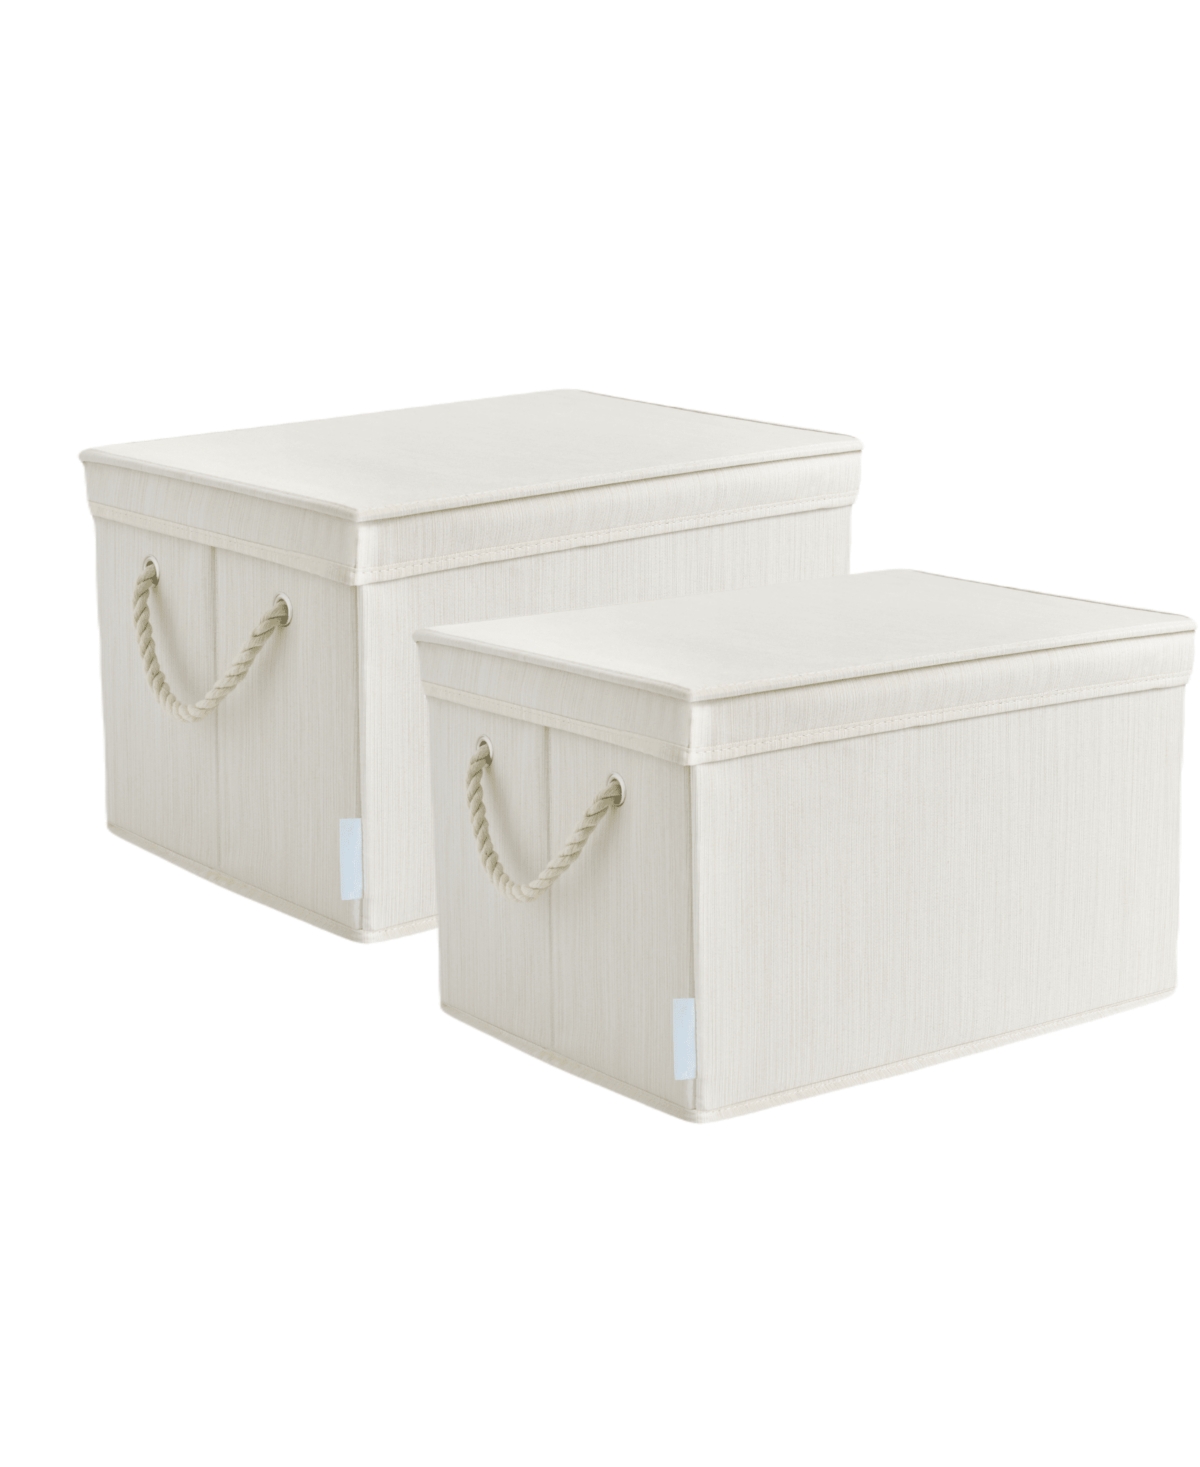 Wethinkstorage 34 Litre Collapsible Fabric Storage Bins With Lids And Cotton Rope Handles, Set Of 2 In Ivory